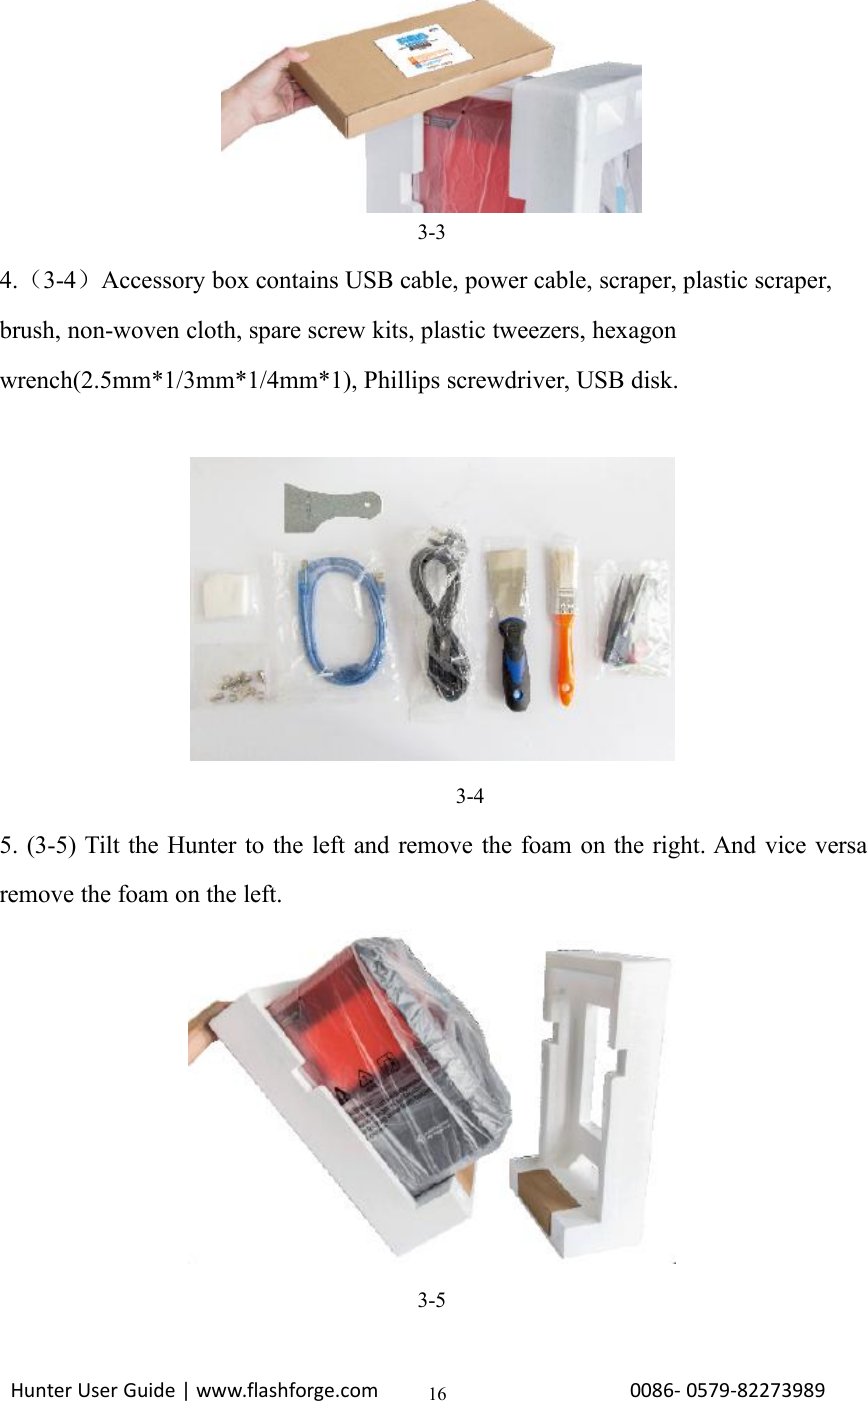 Hunter User Guide | www.flashforge.com 0086- 0579-82273989163-34.（3-4）Accessory box contains USB cable, power cable, scraper, plastic scraper,brush, non-woven cloth, spare screw kits, plastic tweezers, hexagonwrench(2.5mm*1/3mm*1/4mm*1), Phillips screwdriver, USB disk.3-45. (3-5) Tilt the Hunter to the left and remove the foam on the right. And vice versaremove the foam on the left.3-5